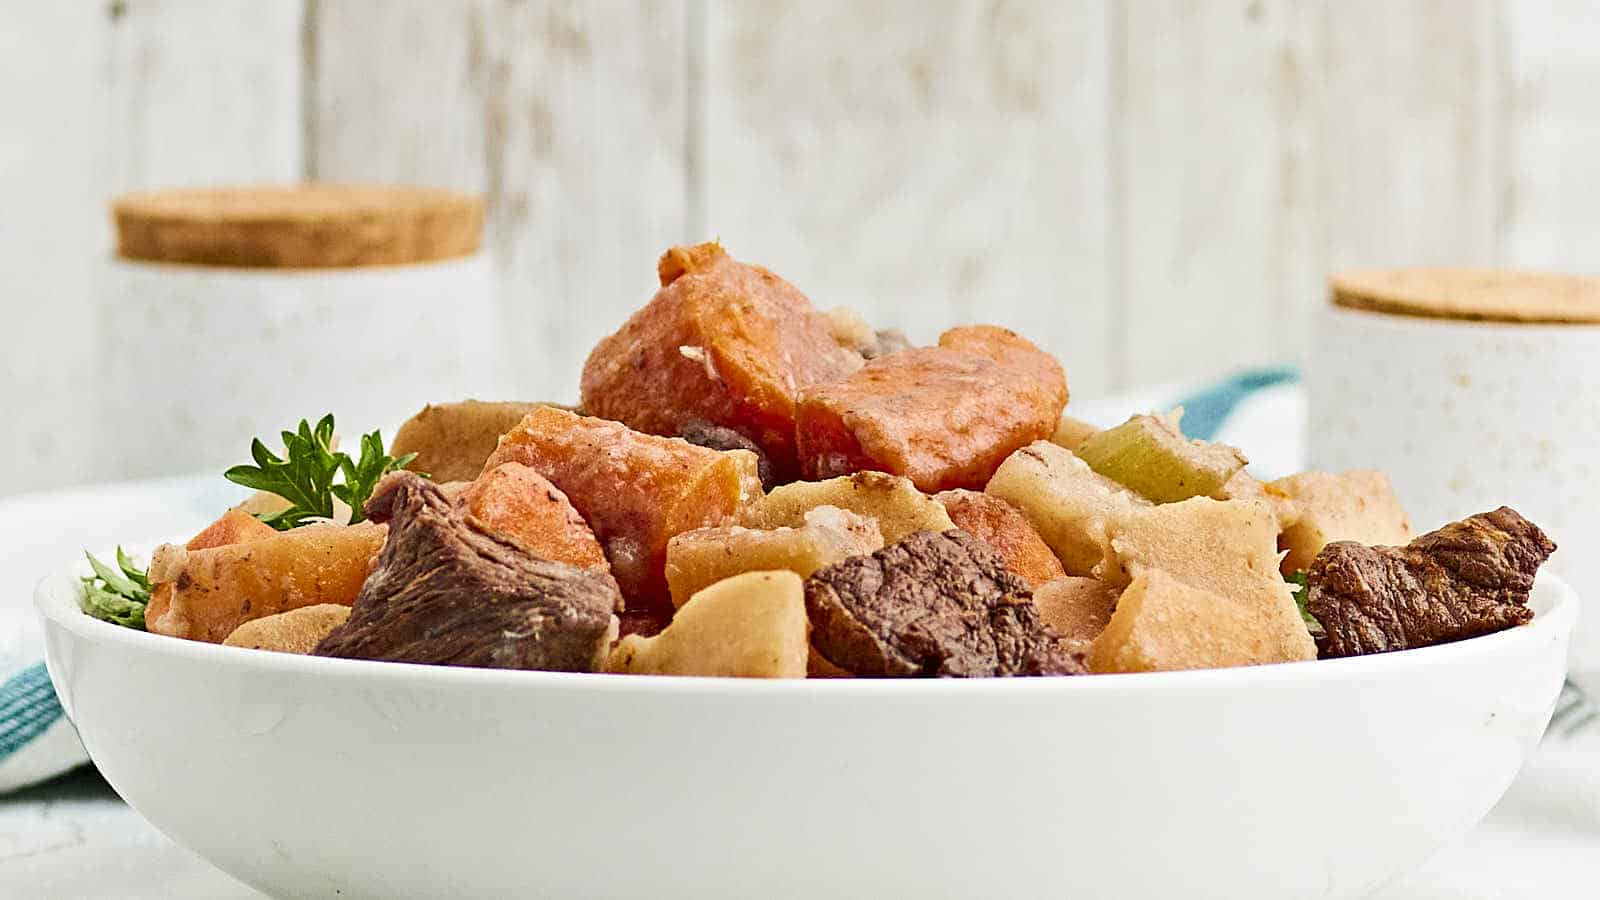 Beef stew in a white bowl on a table.